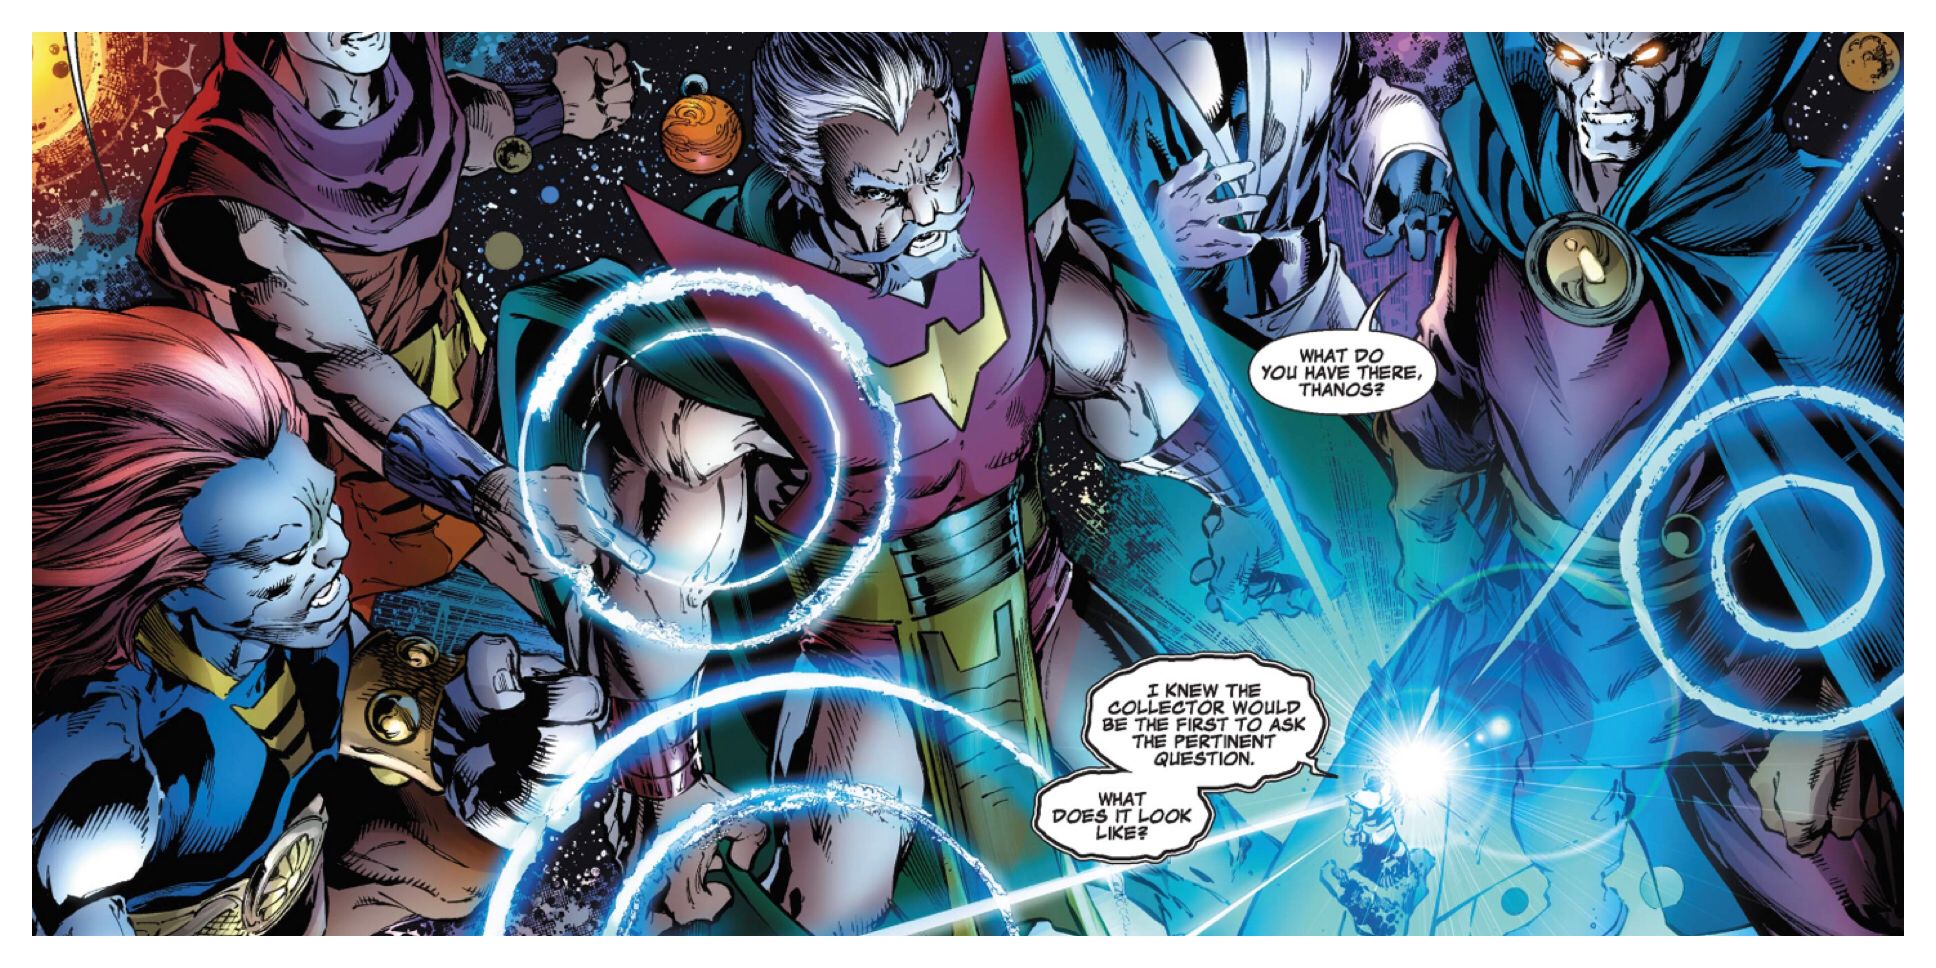 Thanos and the Elders of the Universe with a Cosmic Cube